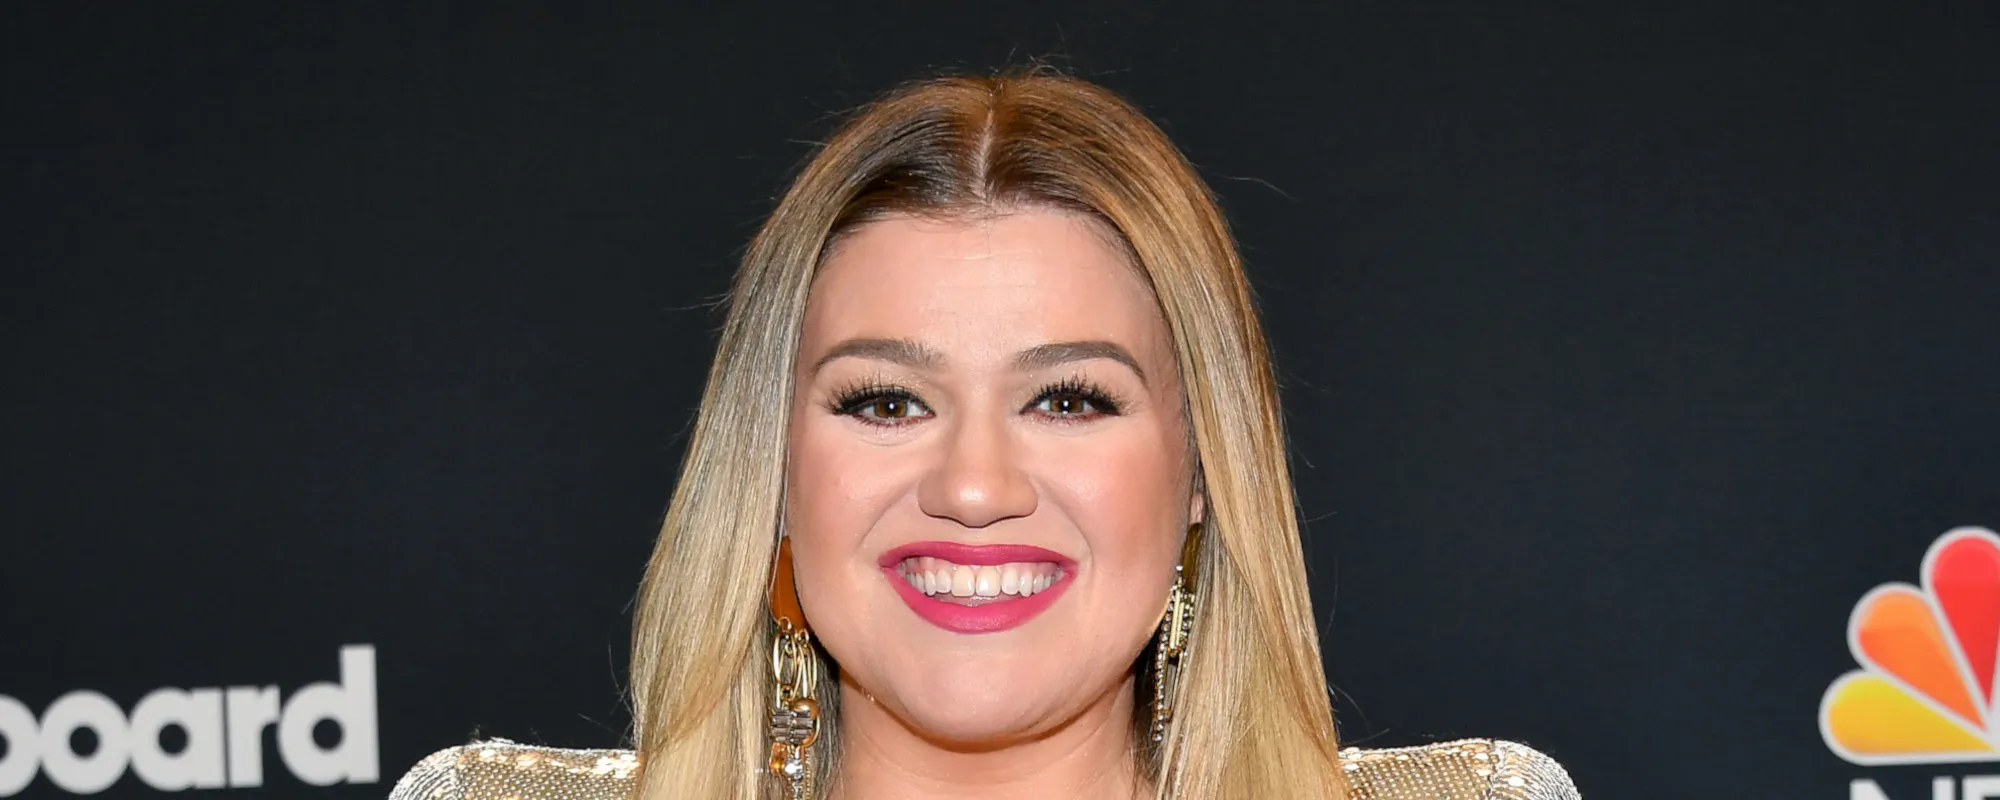 Kelly Clarkson Performs Cover of “working” by Tate McRae & Khalid for Latest Kellyoke